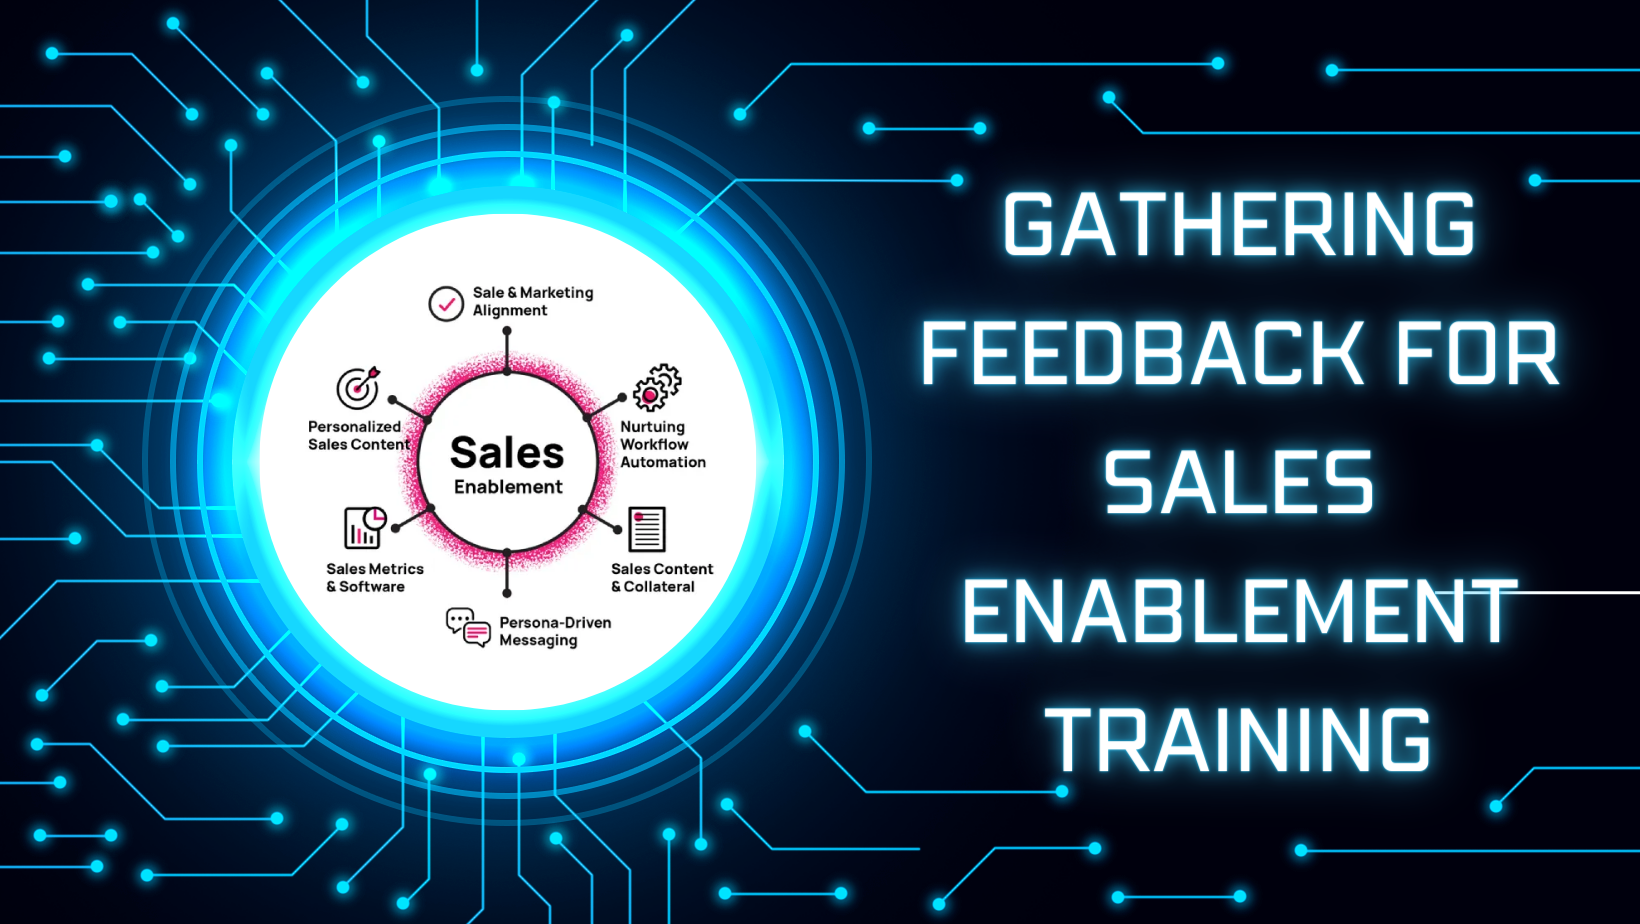 Gathering Feedback For Sales Enablement Training